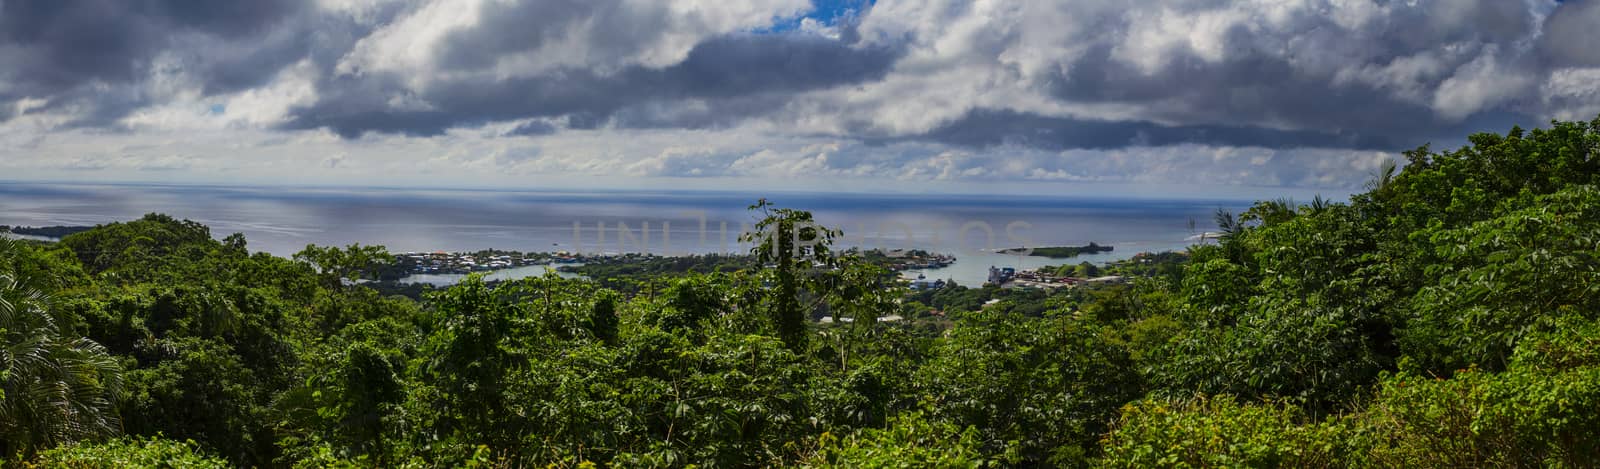 Village on the island of Roatan behind a jungle forest